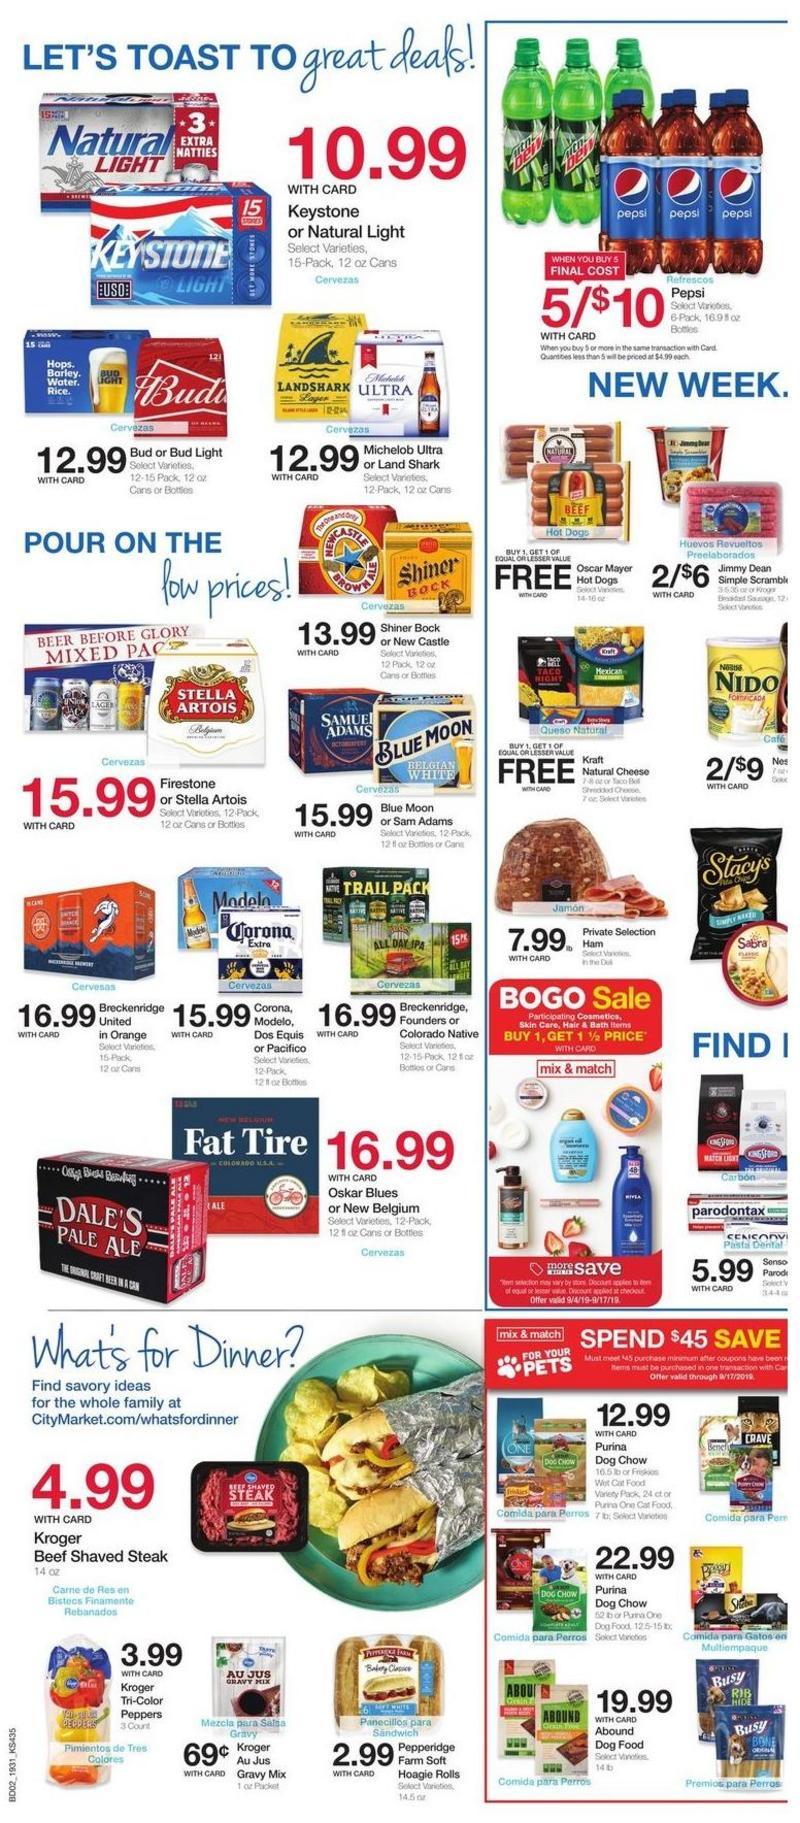 City Market Weekly Ad from September 4